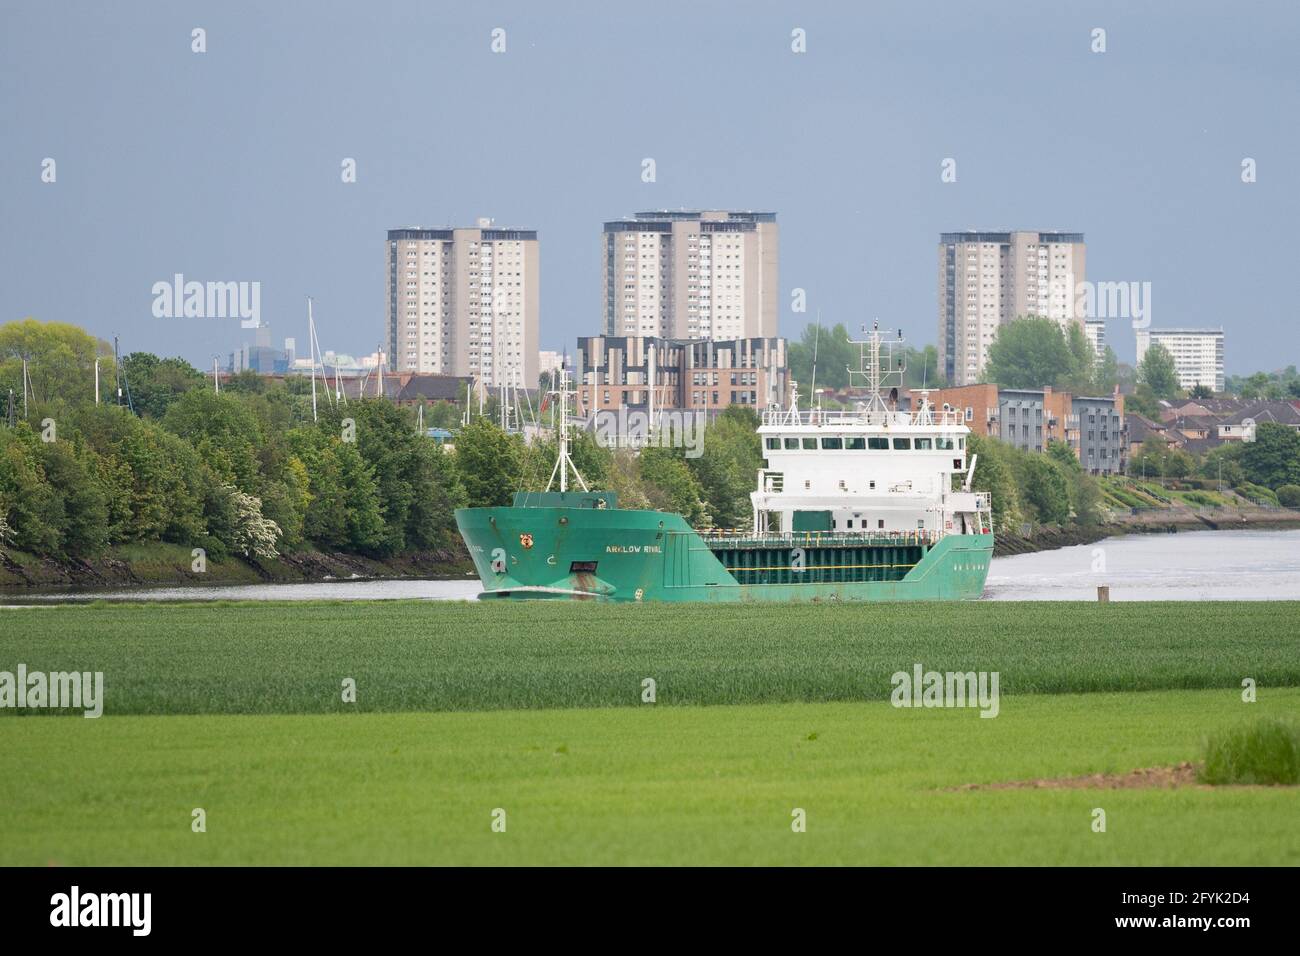 Arklow Rival on the River Clyde Glasgow Stock Photo